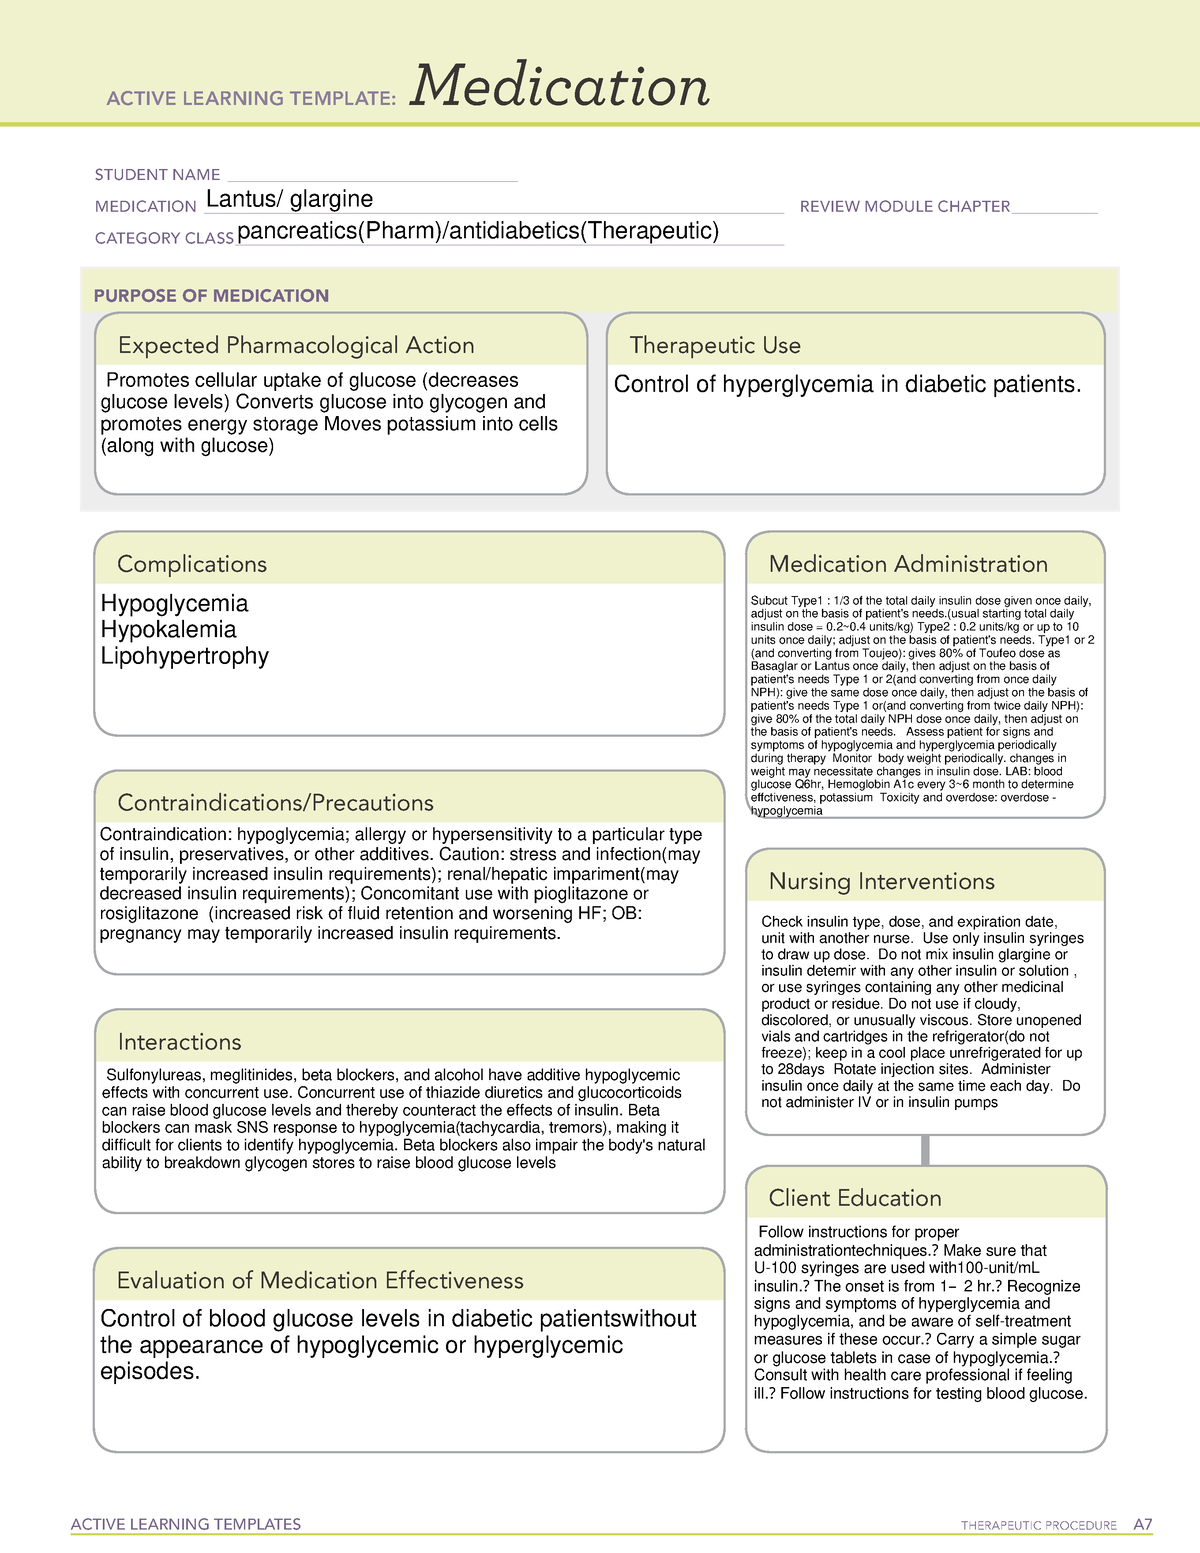 Active Learning Template medication (9)lantus ACTIVE LEARNING